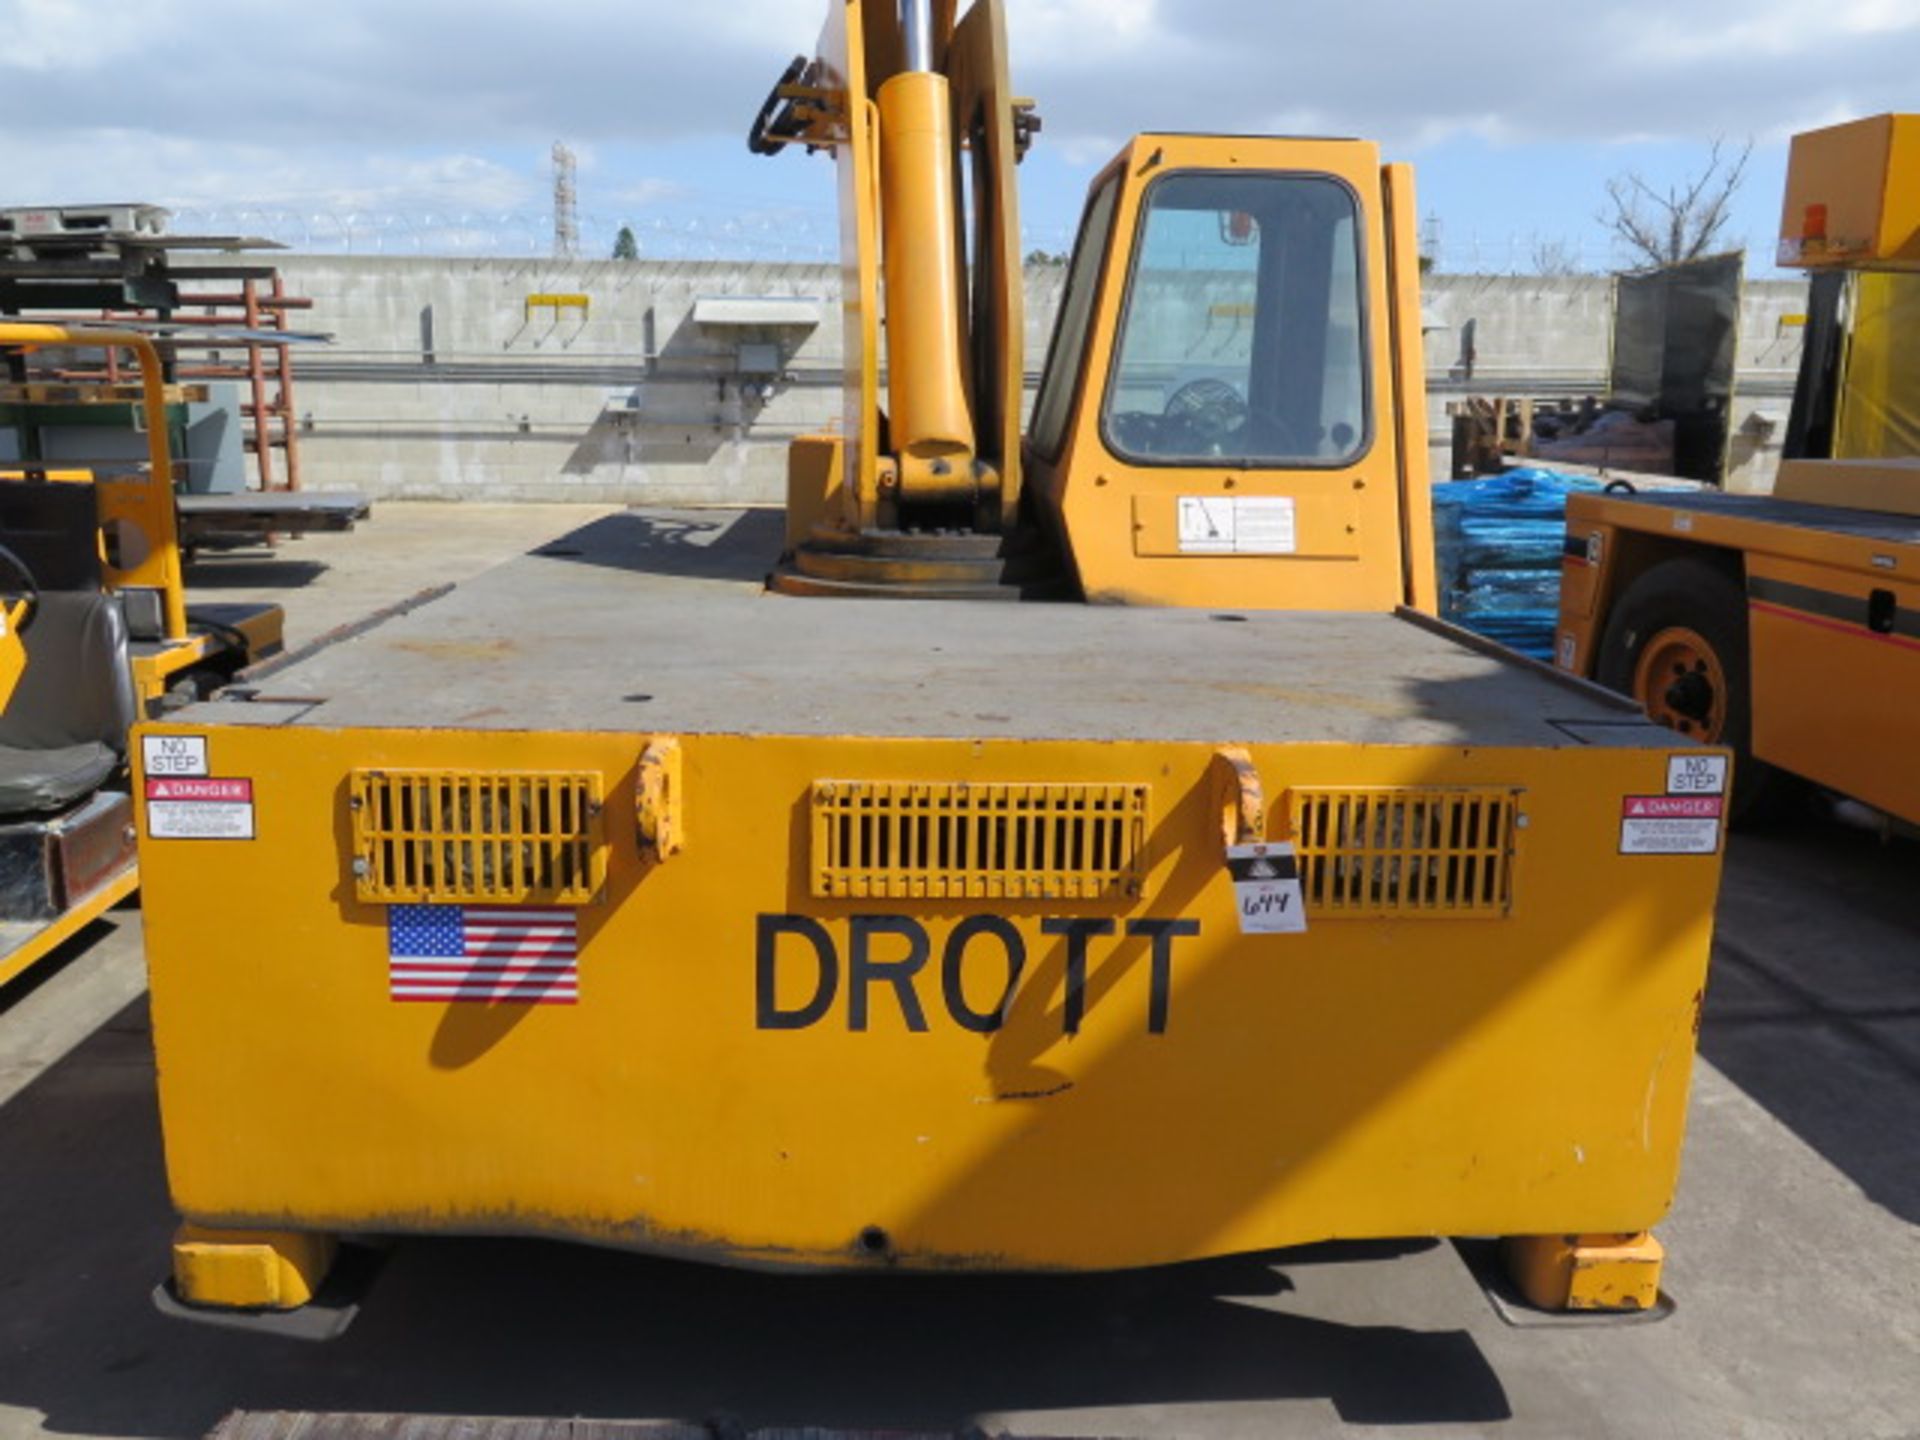 Drott 3330 12,000 Lb Cap (On Outriggers) Diesel Carry Deck Crane s/n 6225056 w/ 34’ Lift, SOLD AS IS - Image 3 of 23